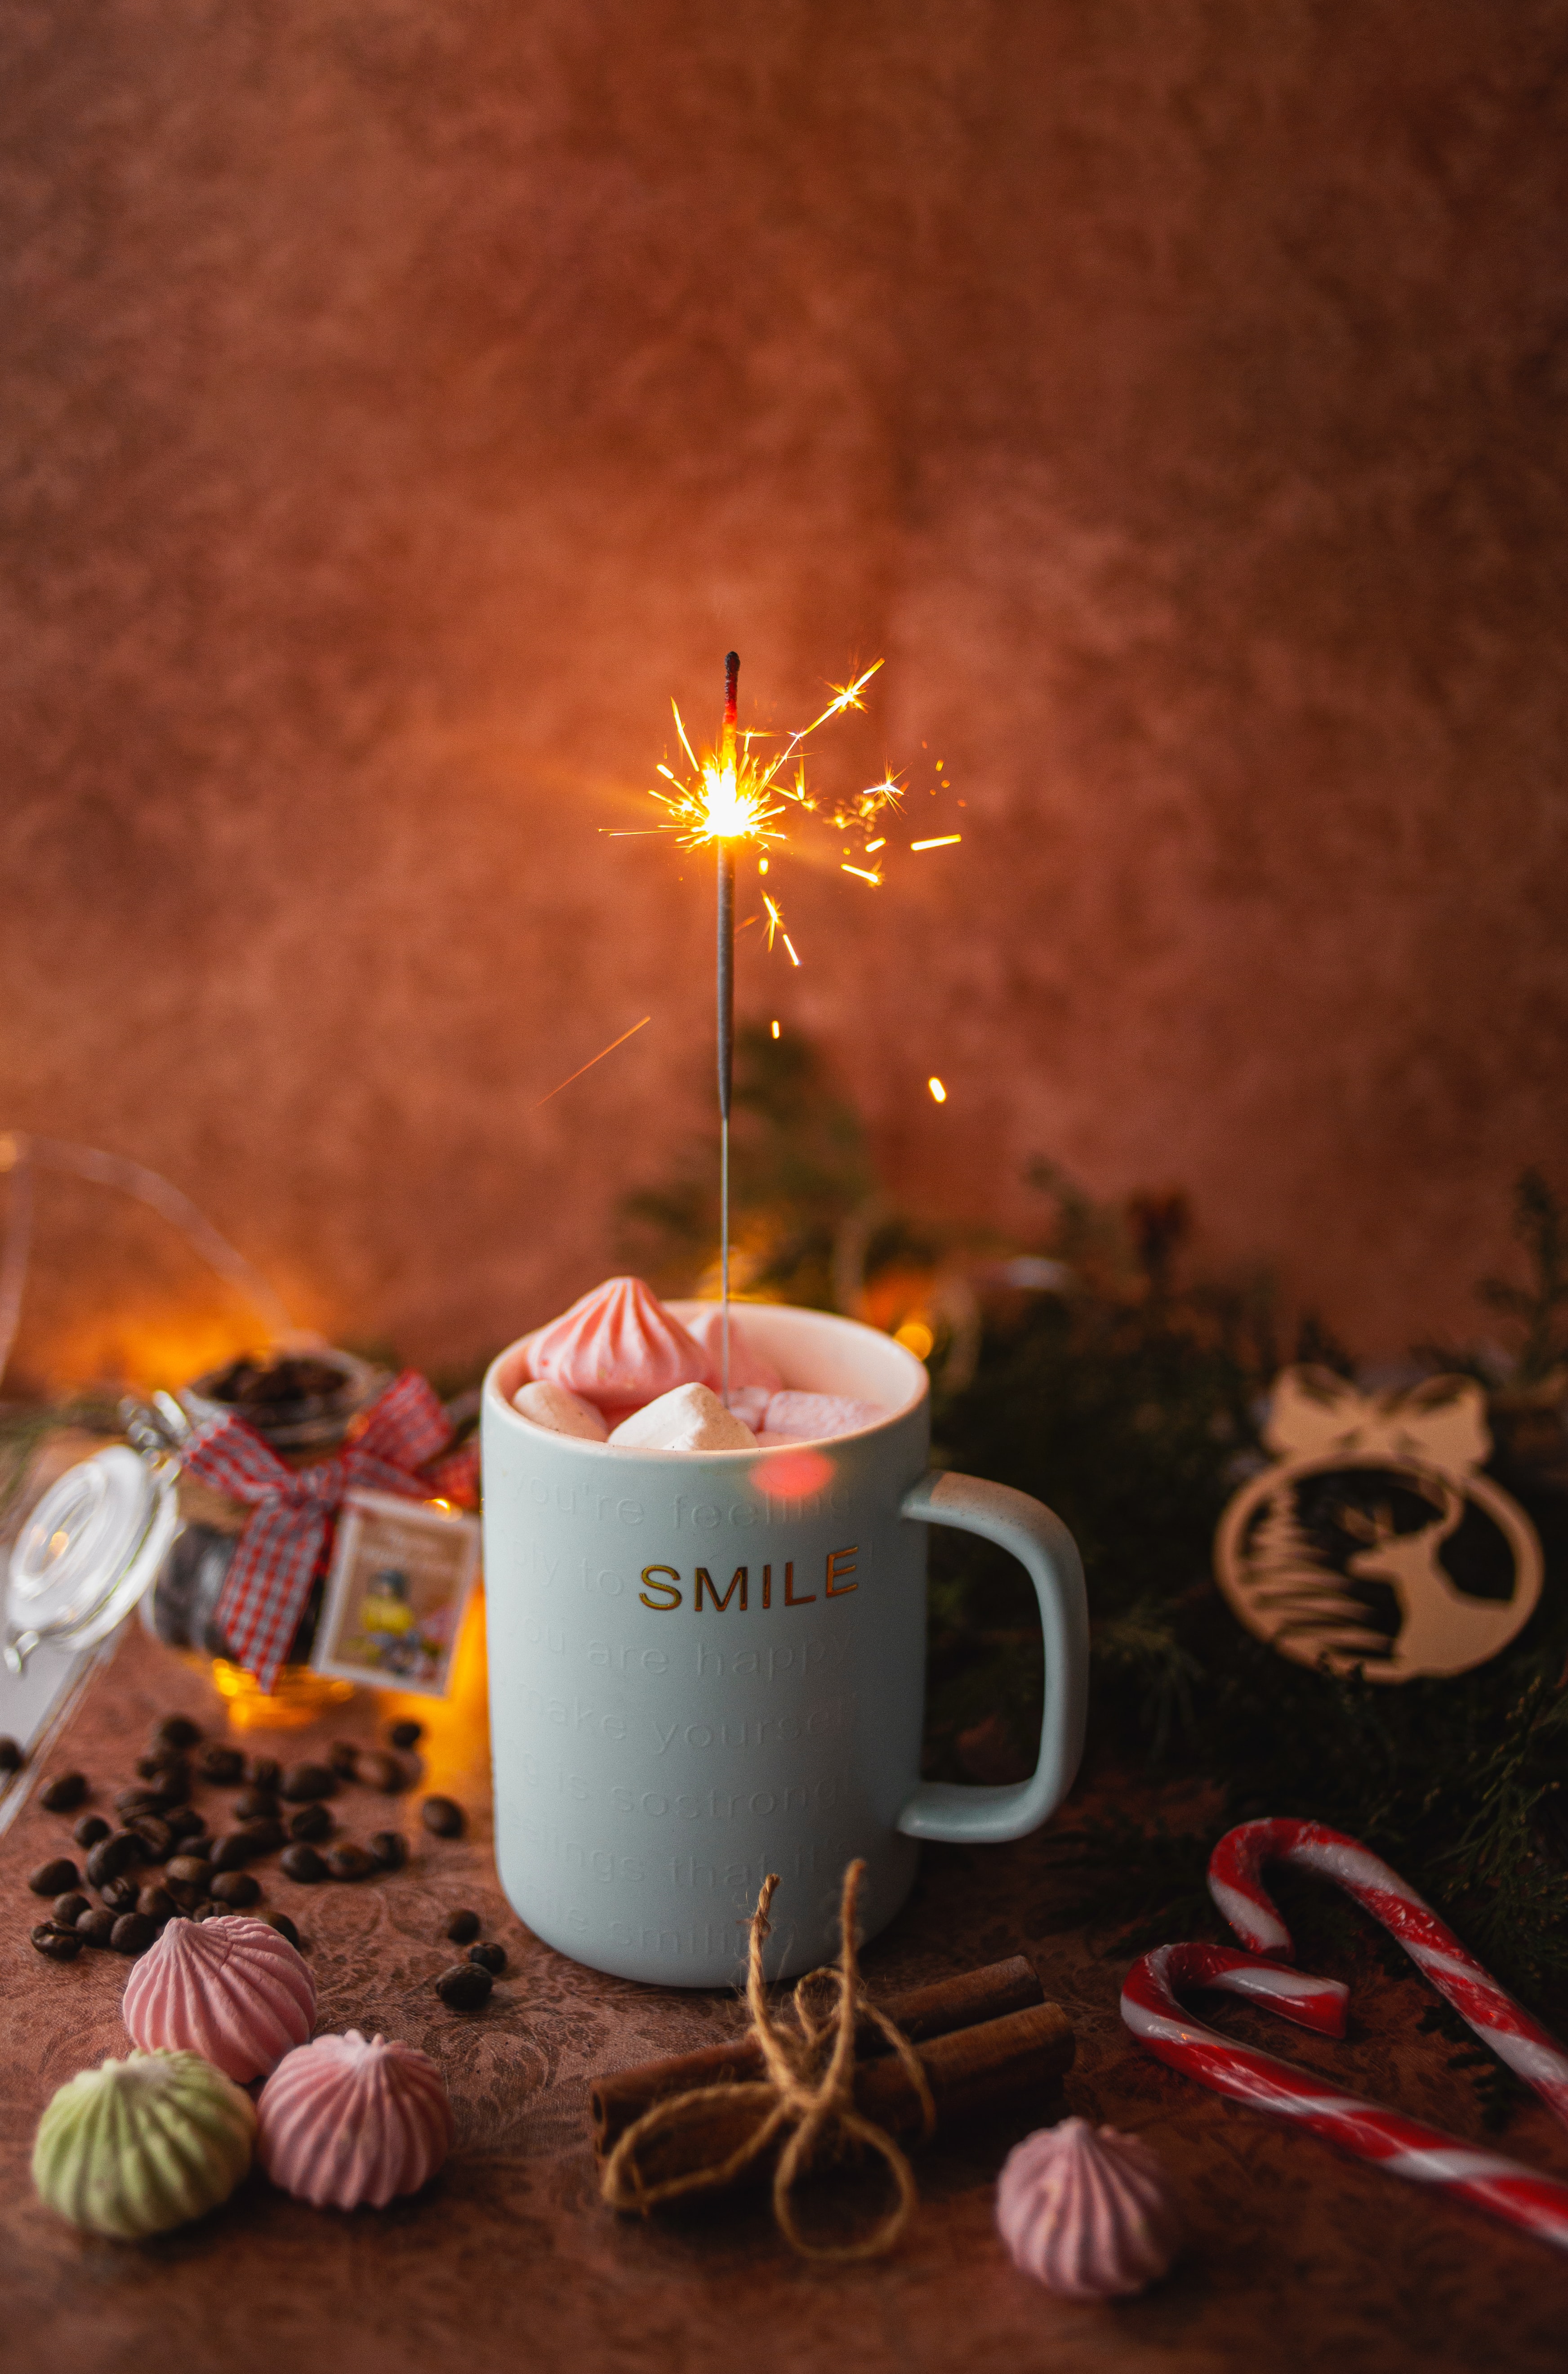 mug, miscellanea, cup, holiday, sparks, miscellaneous, marshmallow, bengal lights, sparklers, zephyr cellphone